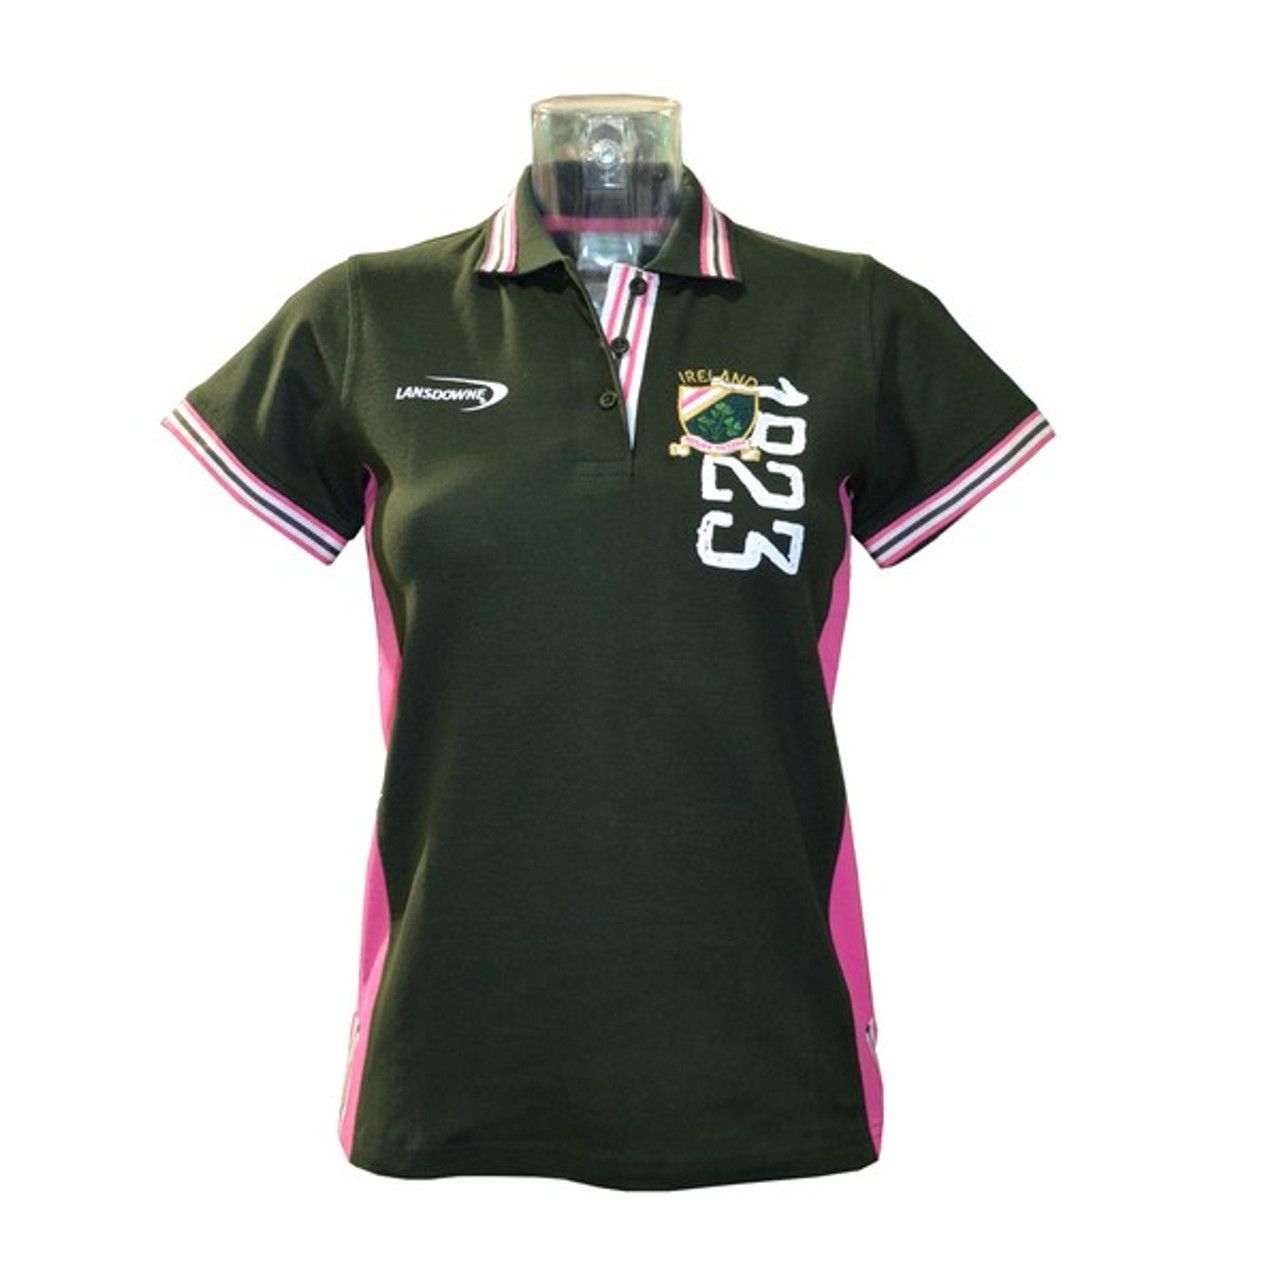 This ladies' bottle green polo shirt boasts bold pink stripes on both sides, creating a slimming and feminine appearance. This polo features the number "1823," a crest of Irish clovers and the Landsdowne logo. This shirt stands out with its vibrant trim on the sleeves and collar.